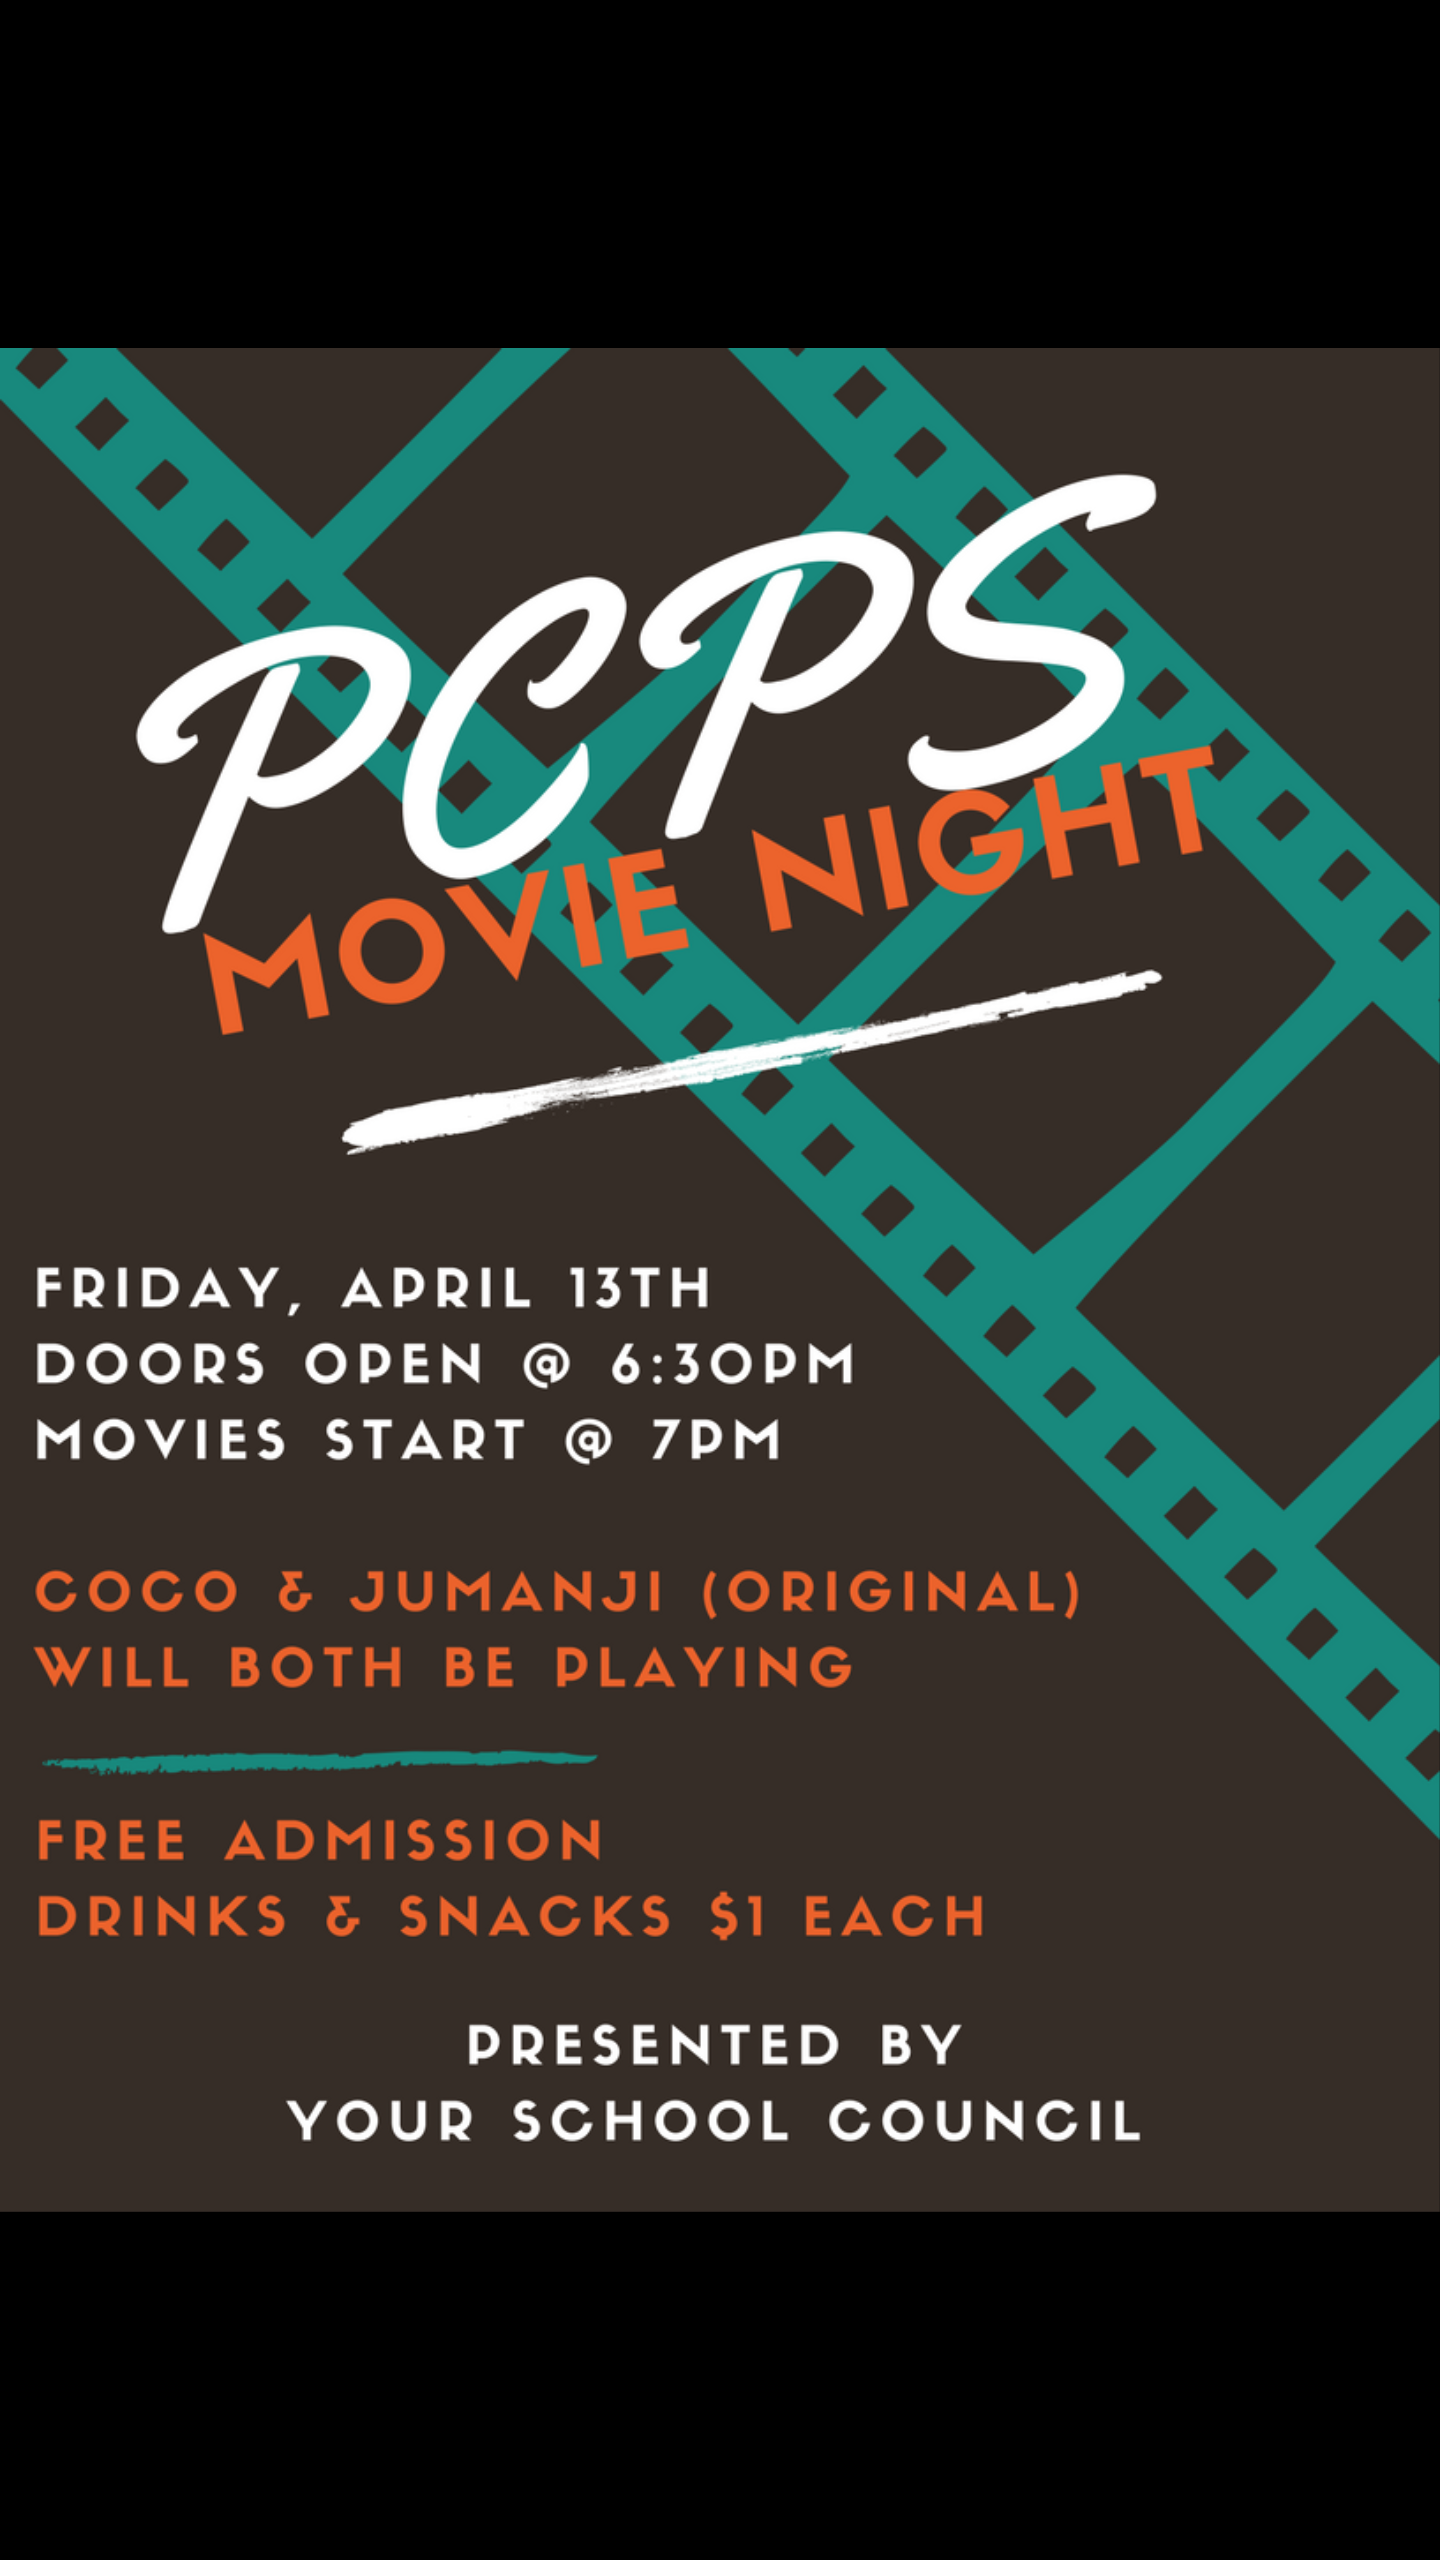 Double bill for movie night at Pleasant Corners Public School on April 13